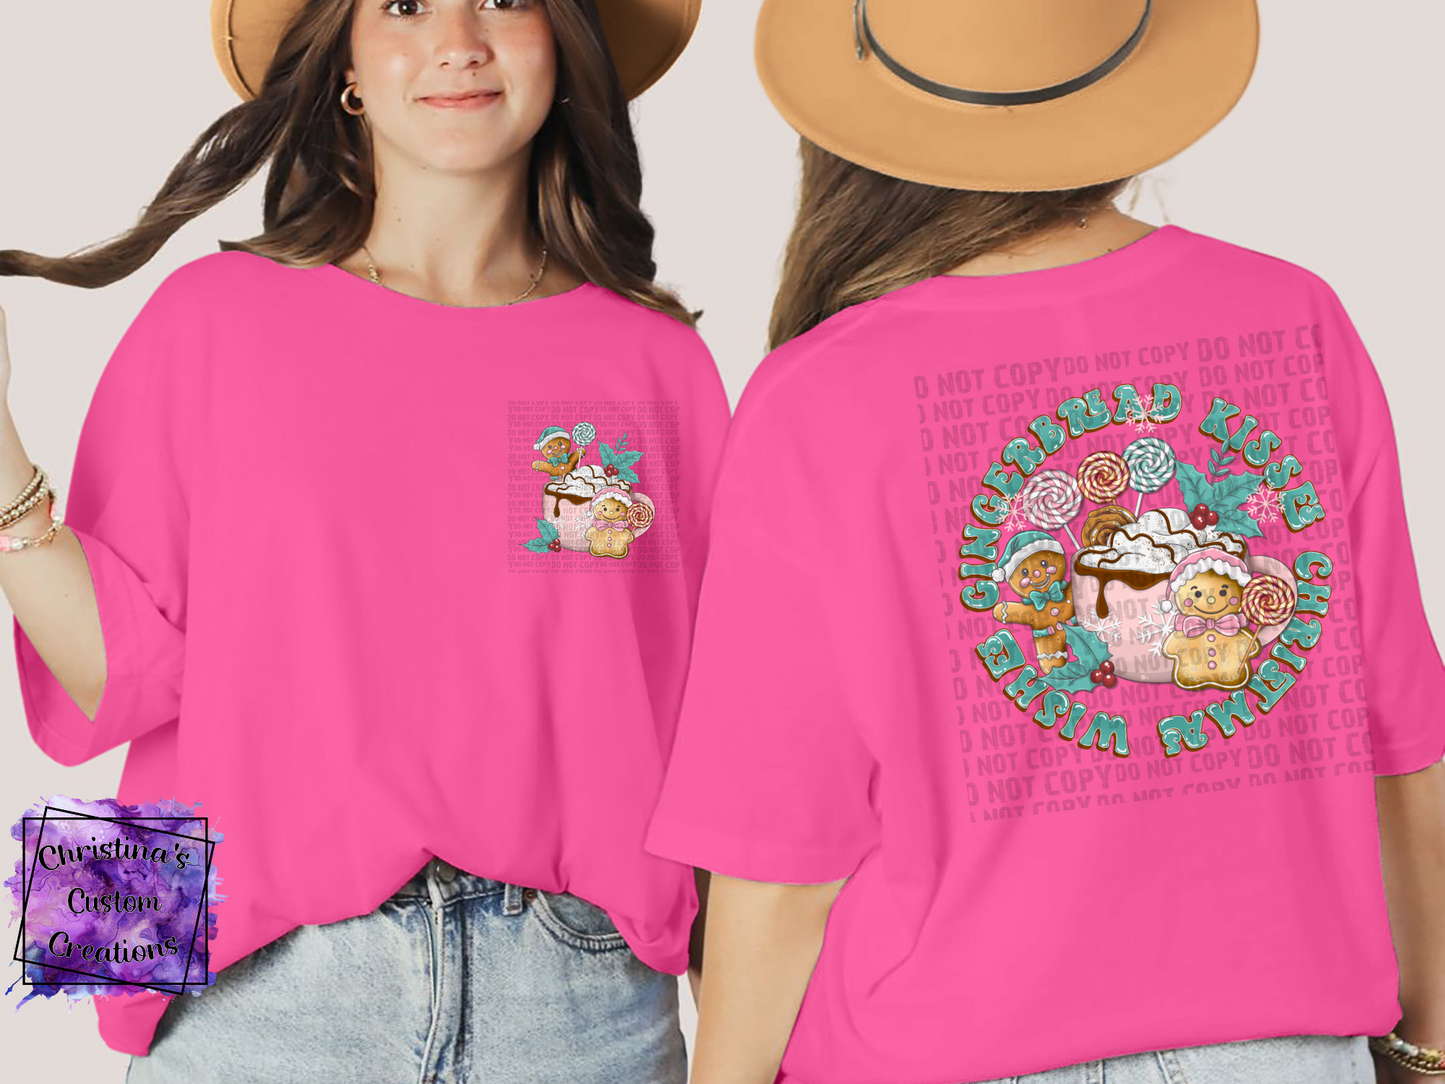 Gingerbread Kisses T-Shirt | Cute Christmas Shirt | Front and Back Shirt | Fast Shipping | Super Soft Shirts for Women/Kid's